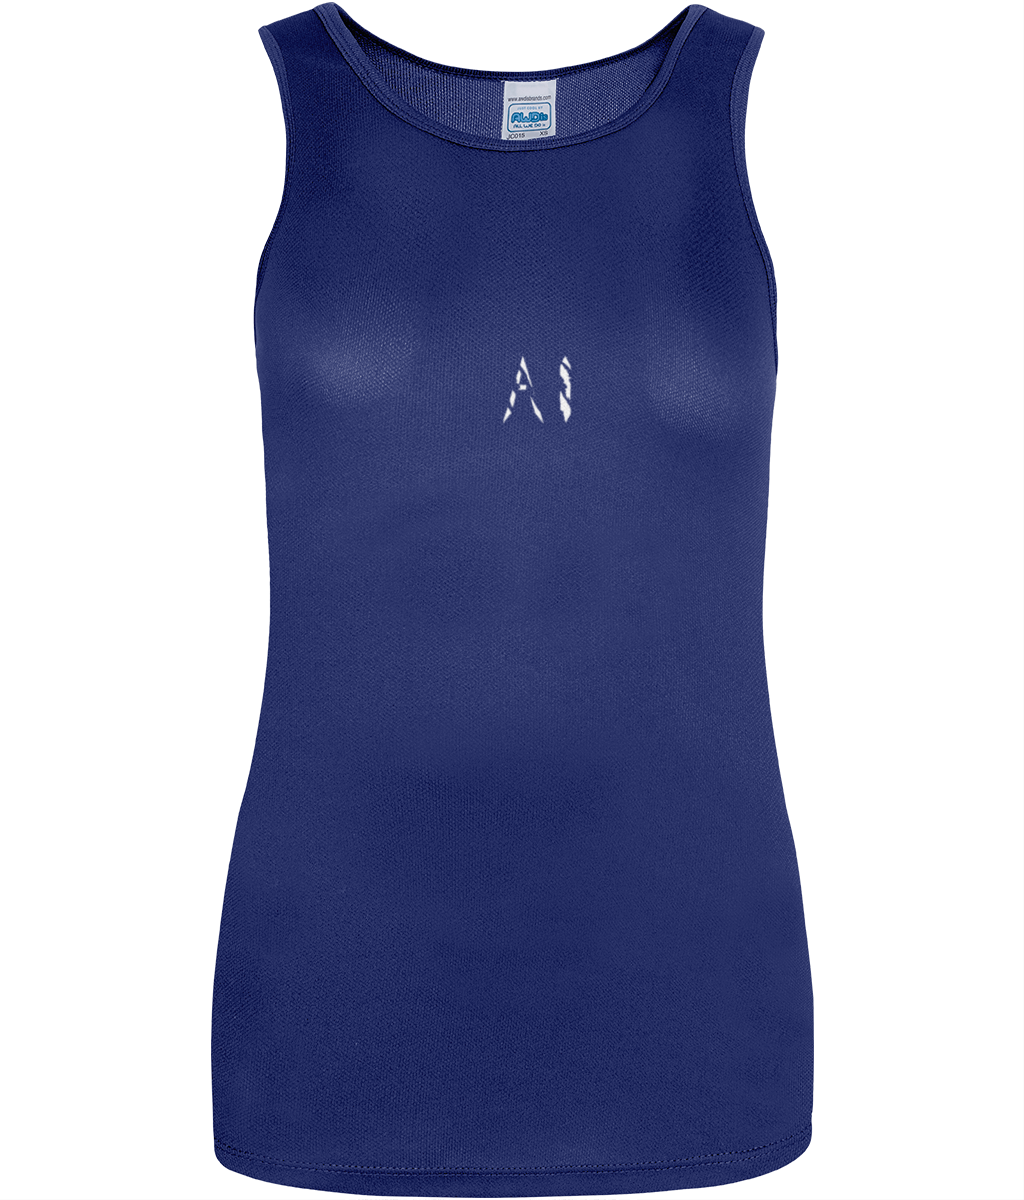 Womens dark blue Workout Sports Vest with white AI logo in centre chest